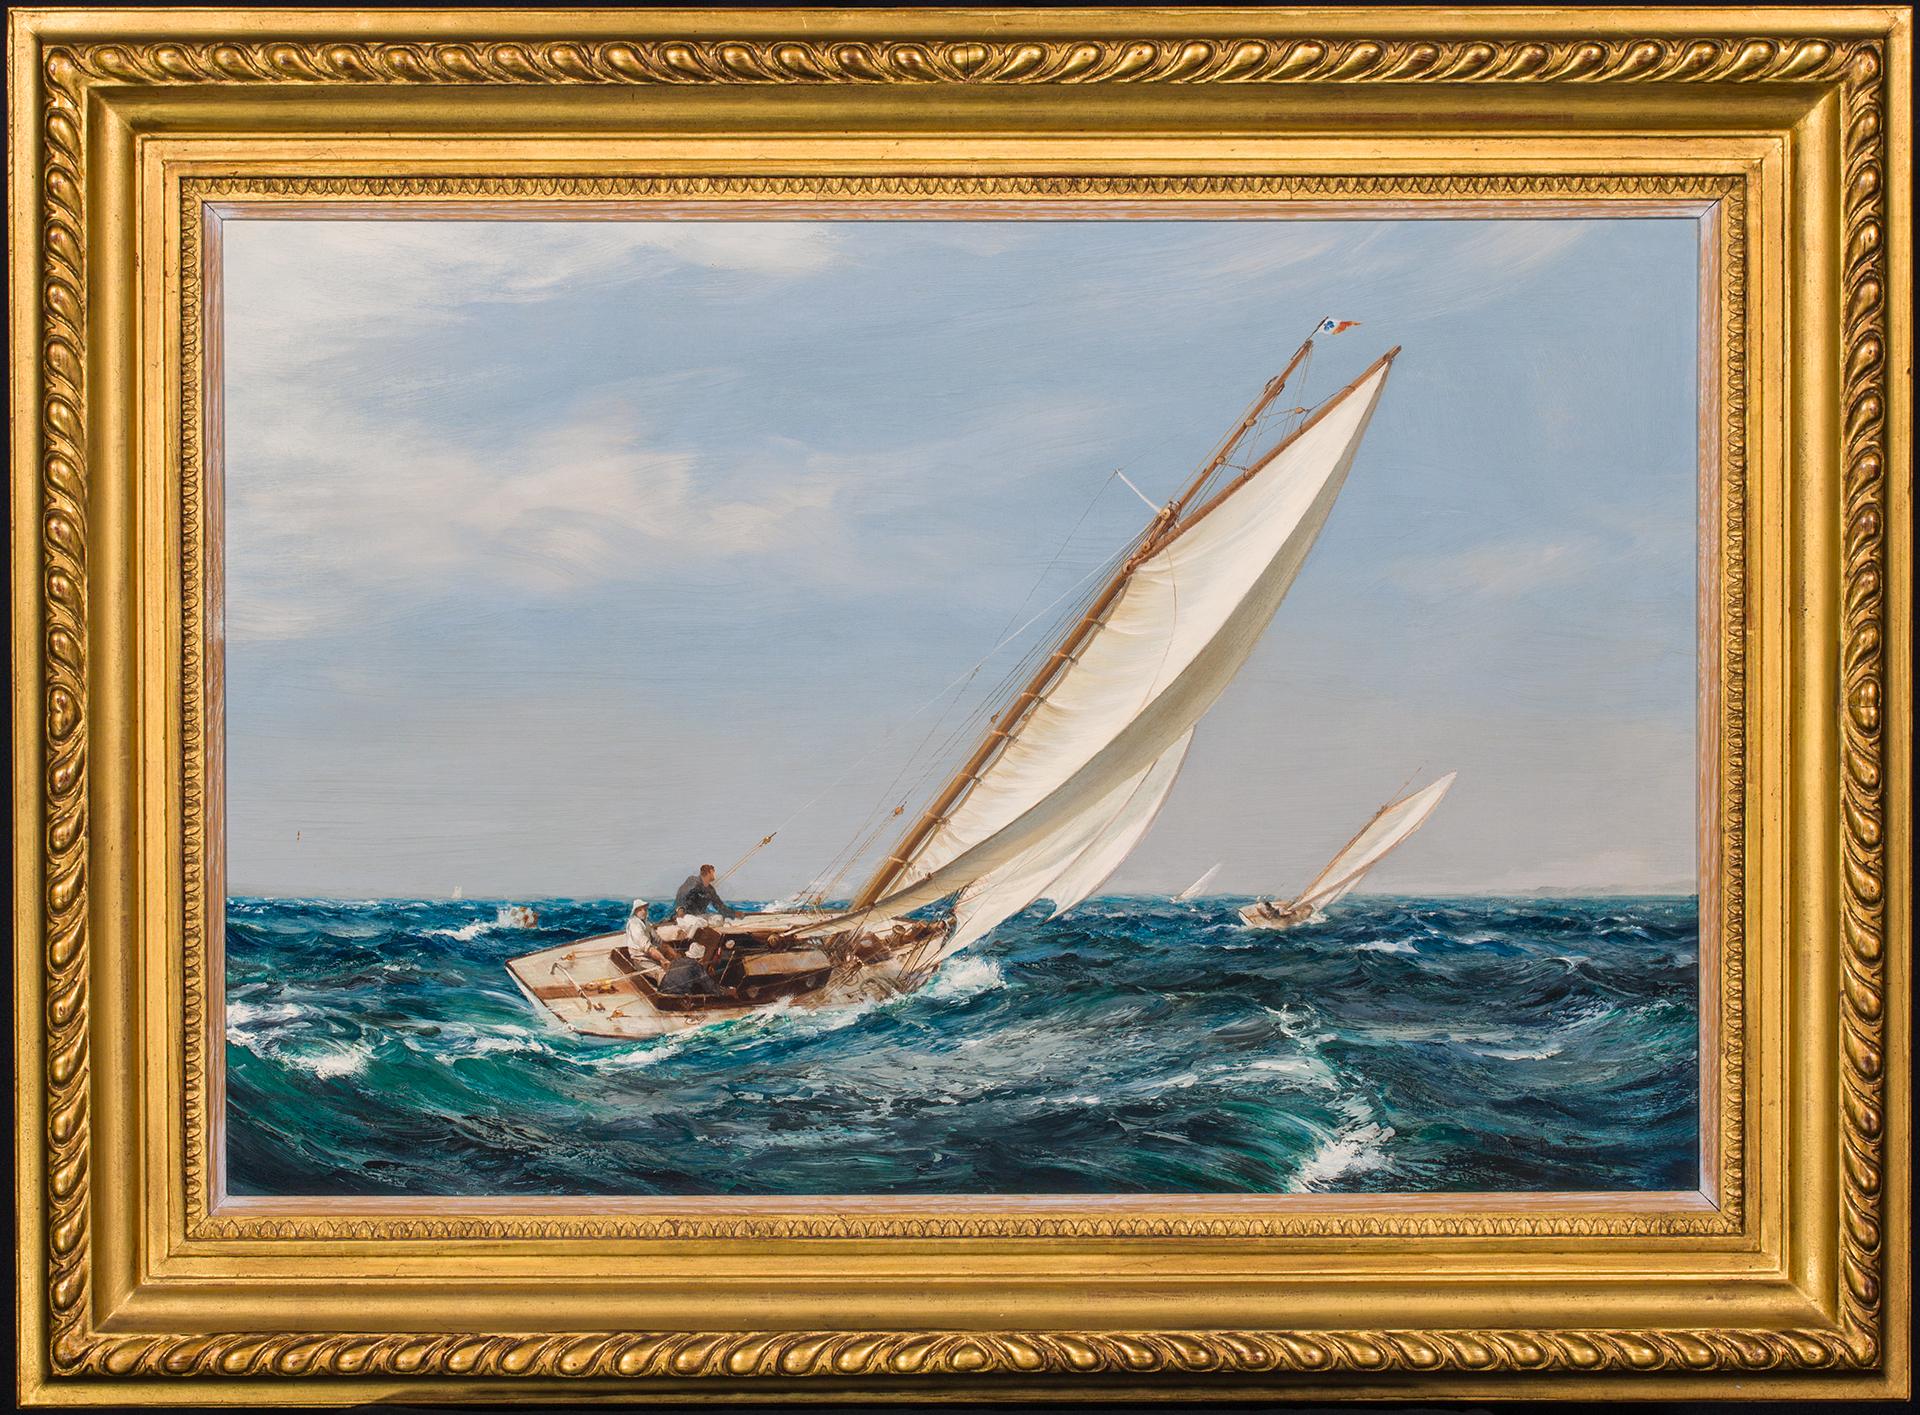 Solent One Racers cut across the rolling waves in this striking work by master maritime artist Montague Dawson. These are racing on the Solent, the strait between the Isle of Wight and the English mainland.

The Solent One Design was one of the